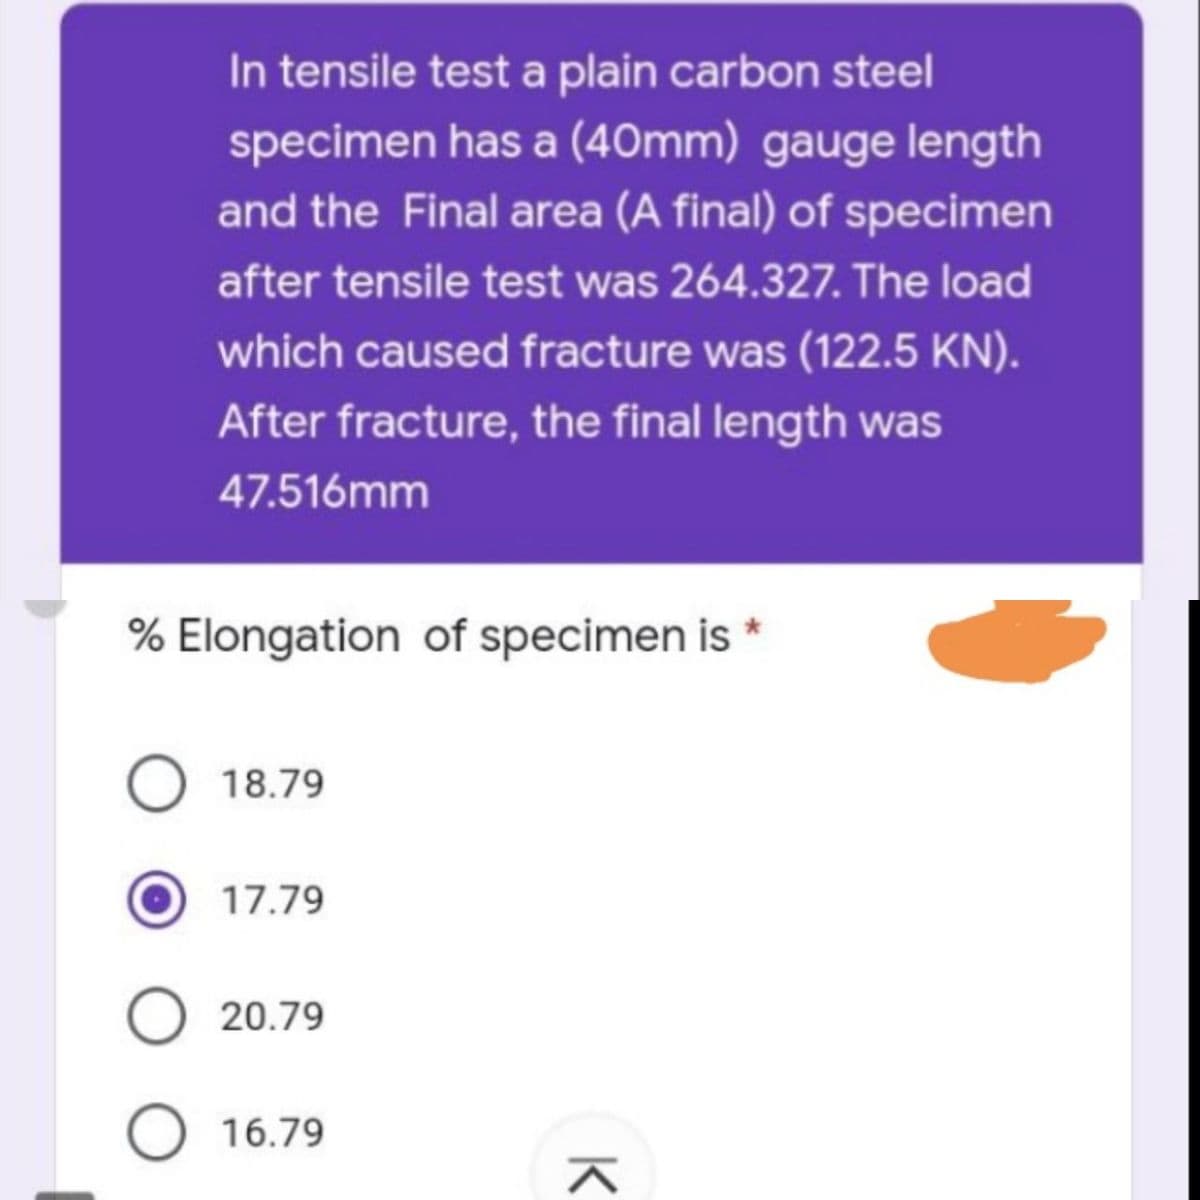 In tensile test a plain carbon steel
specimen has a (40mm) gauge length
and the Final area (A final) of specimen
after tensile test was 264.327. The load
which caused fracture was (122.5 KN).
After fracture, the final length was
47.516mm
% Elongation of specimen is
O 18.79
17.79
O 20.79
O 16.79
K